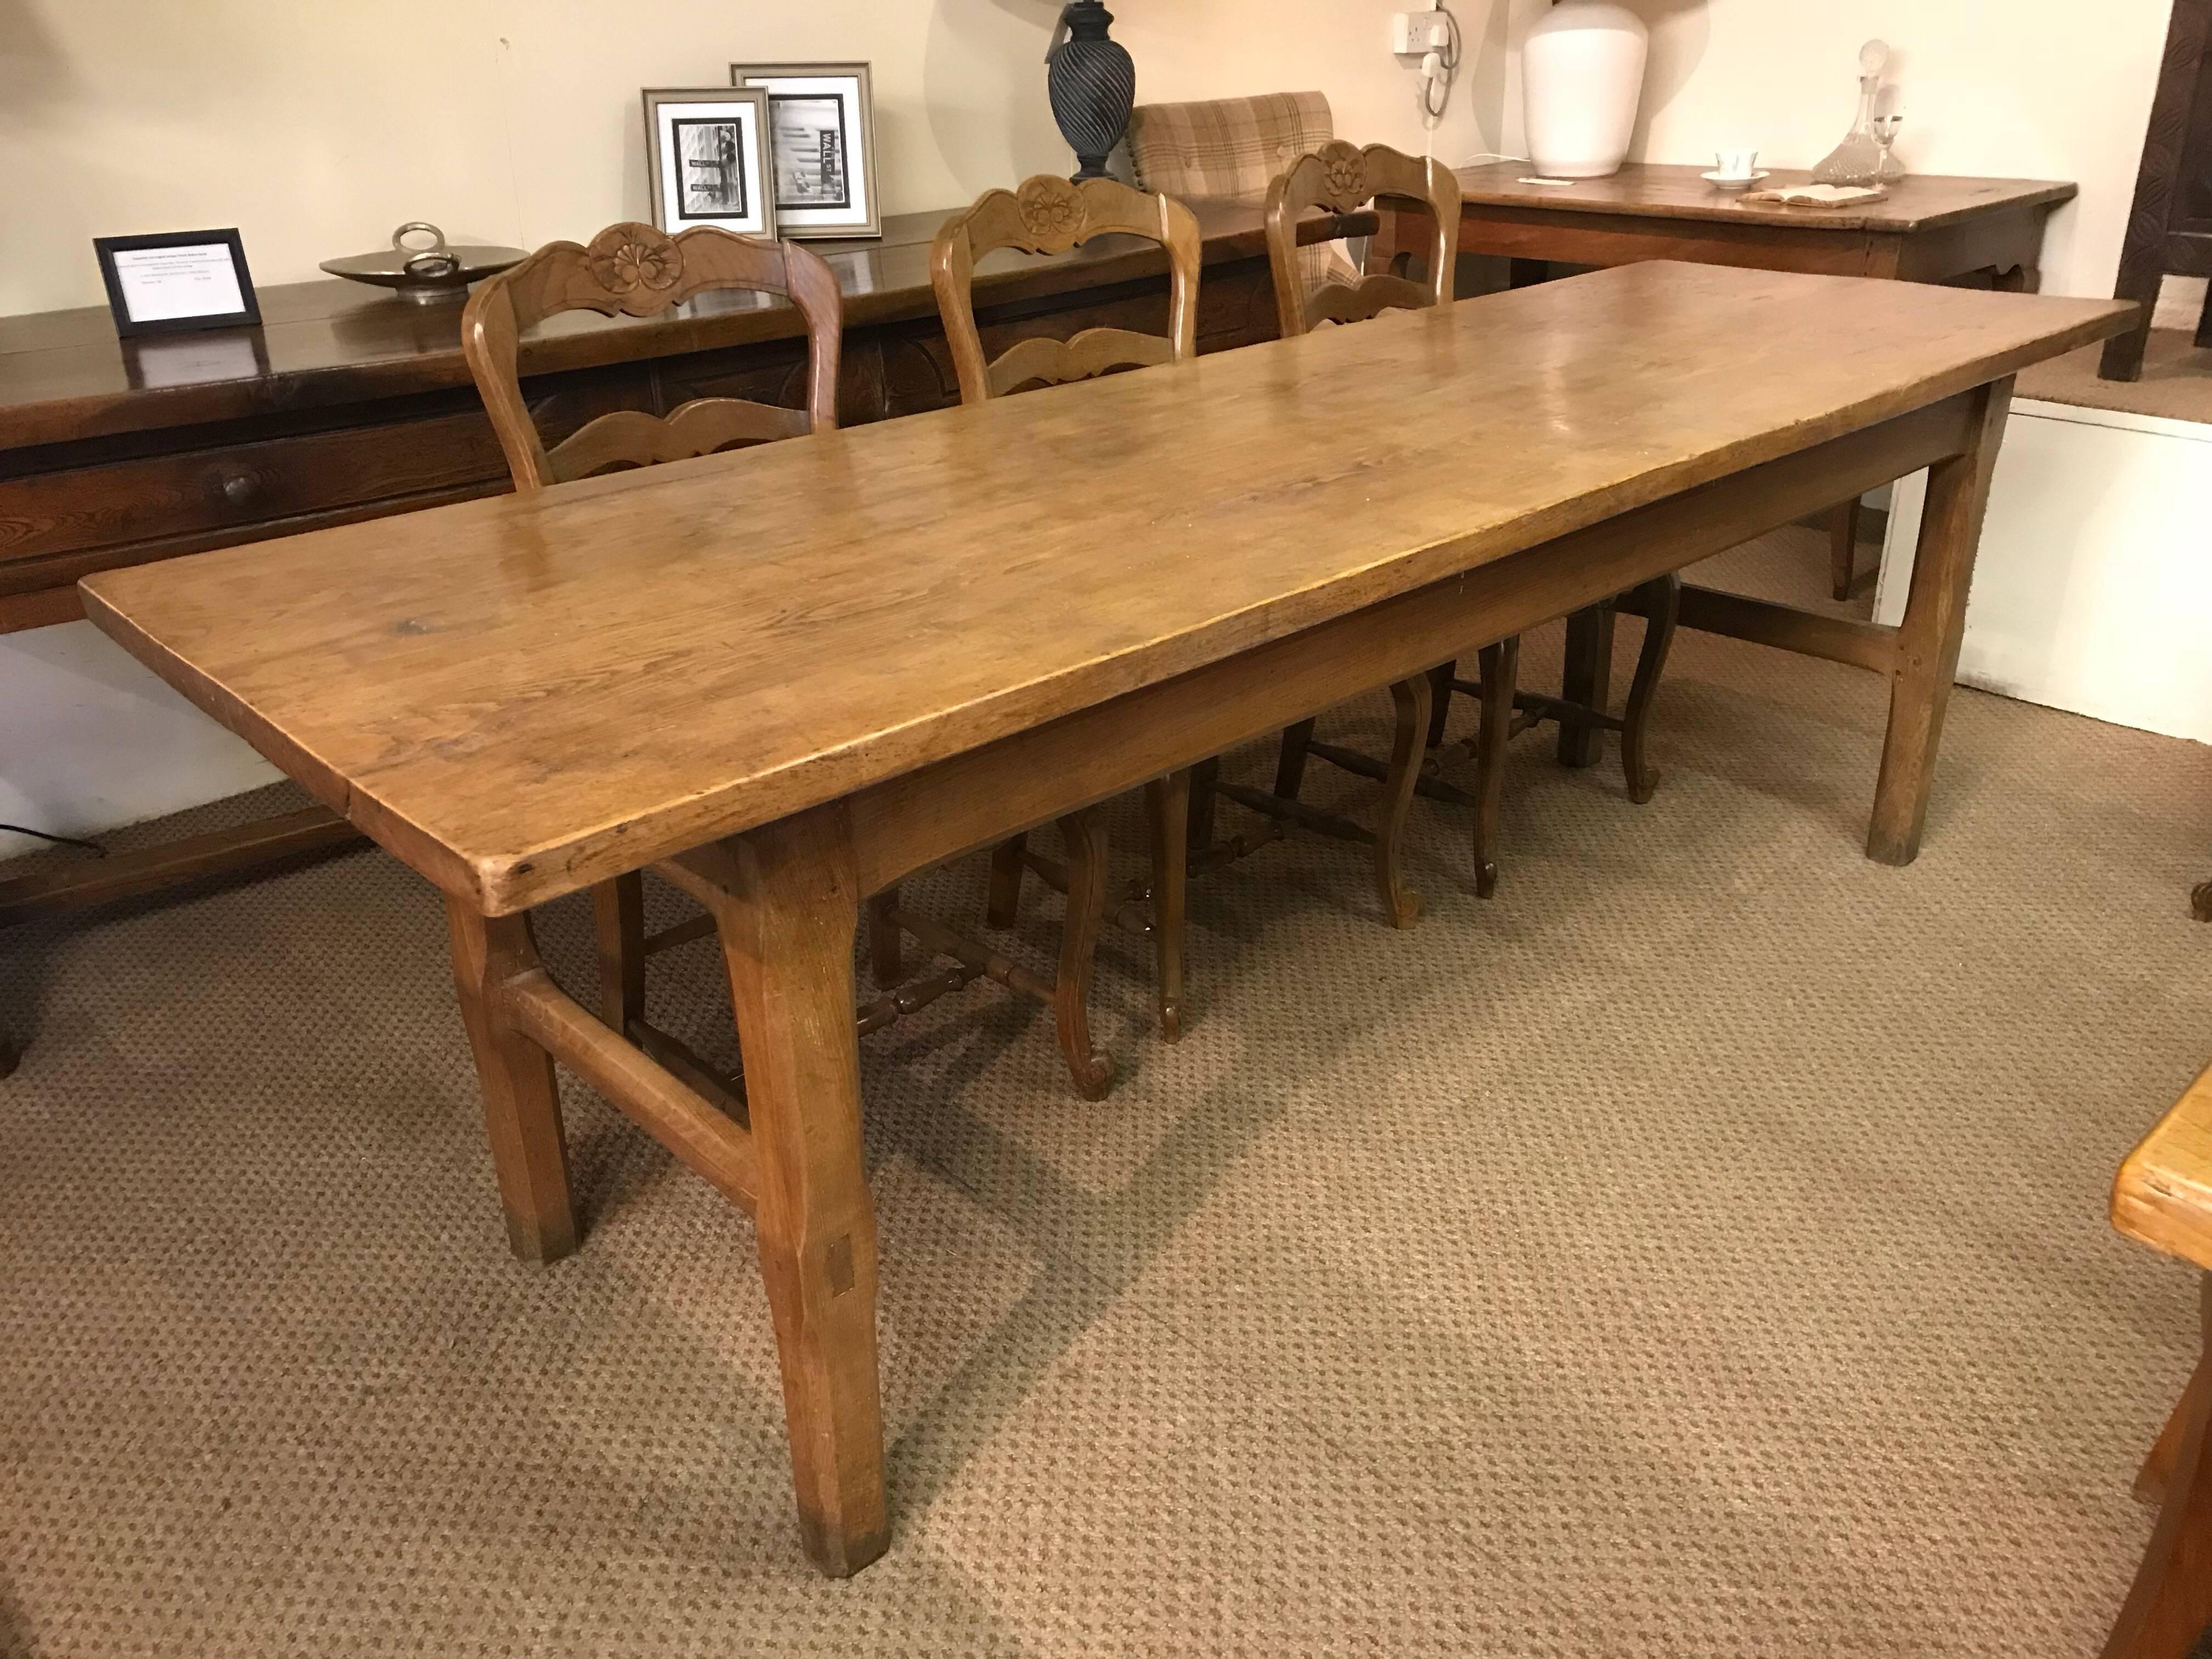 This Ash French farmhouse table has a two plank top and sits on a sturdy h frame base with four square legs. Lovely color and patina. The table is circa 1840 and oozes character.